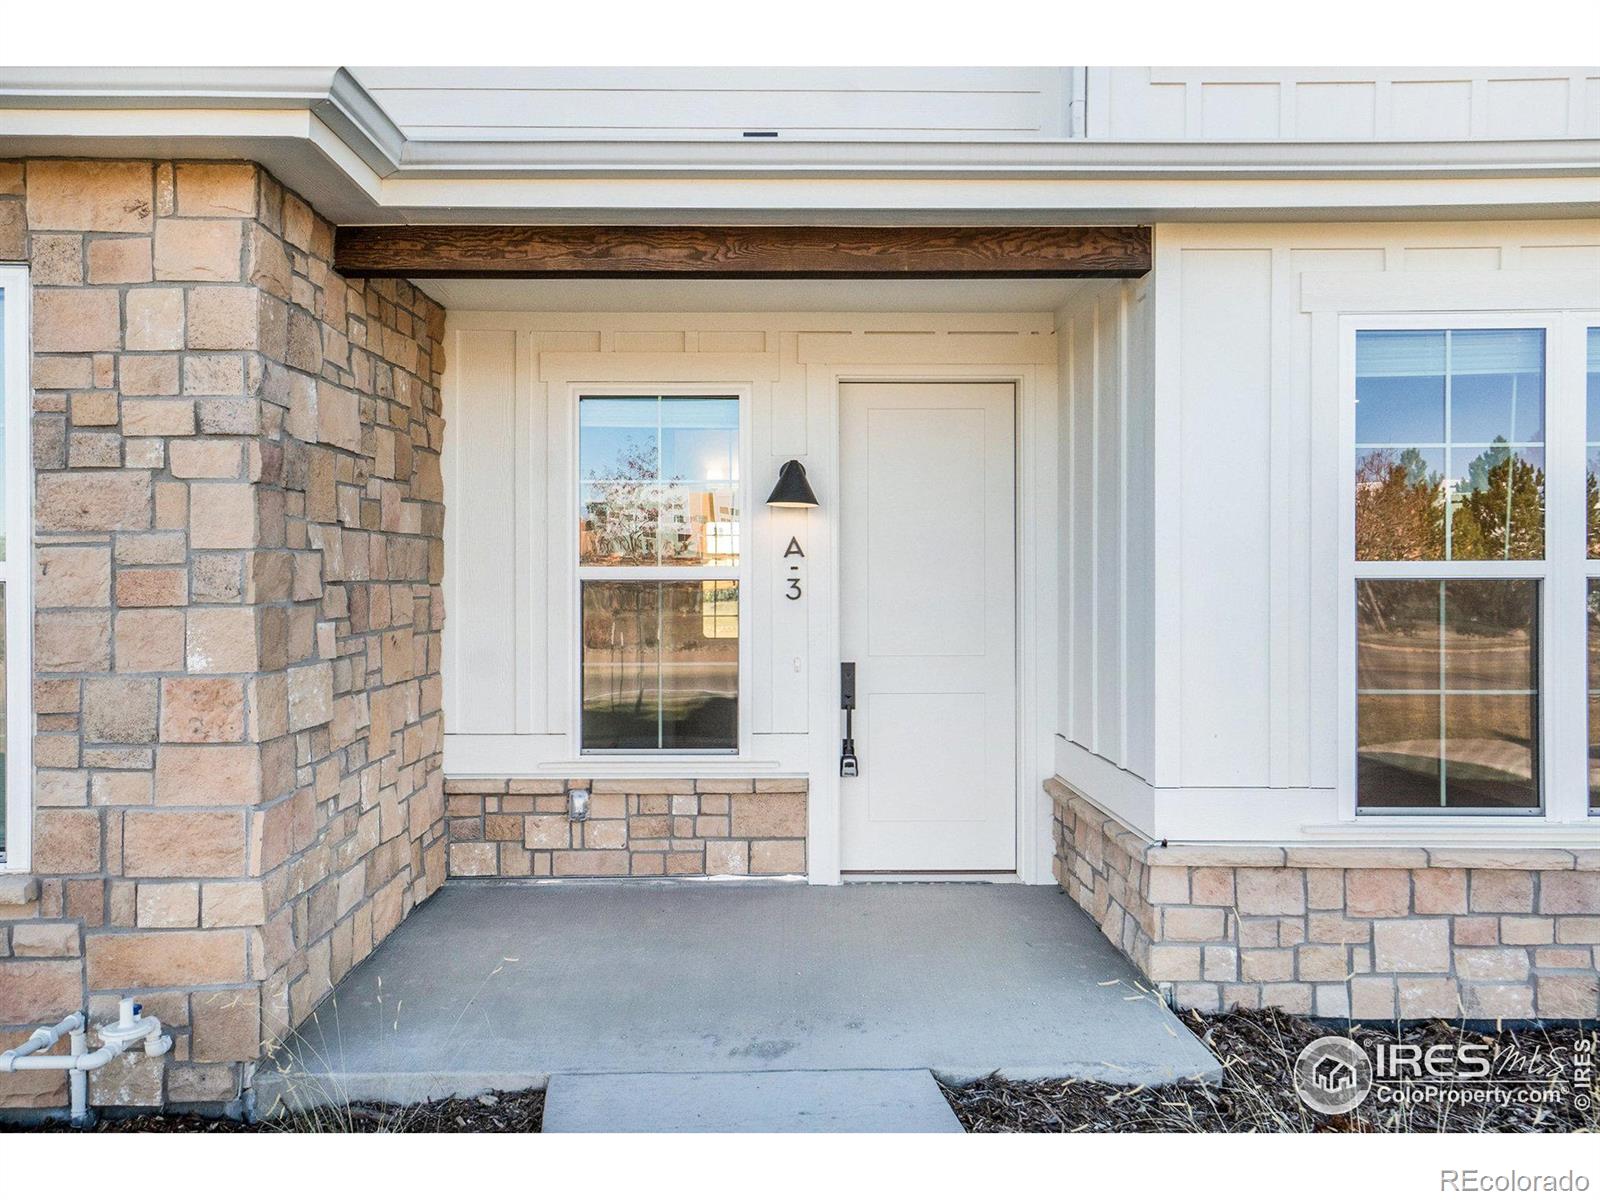 3045 E Trilby Road, fort collins MLS: 4567891006373 Beds: 3 Baths: 3 Price: $499,000